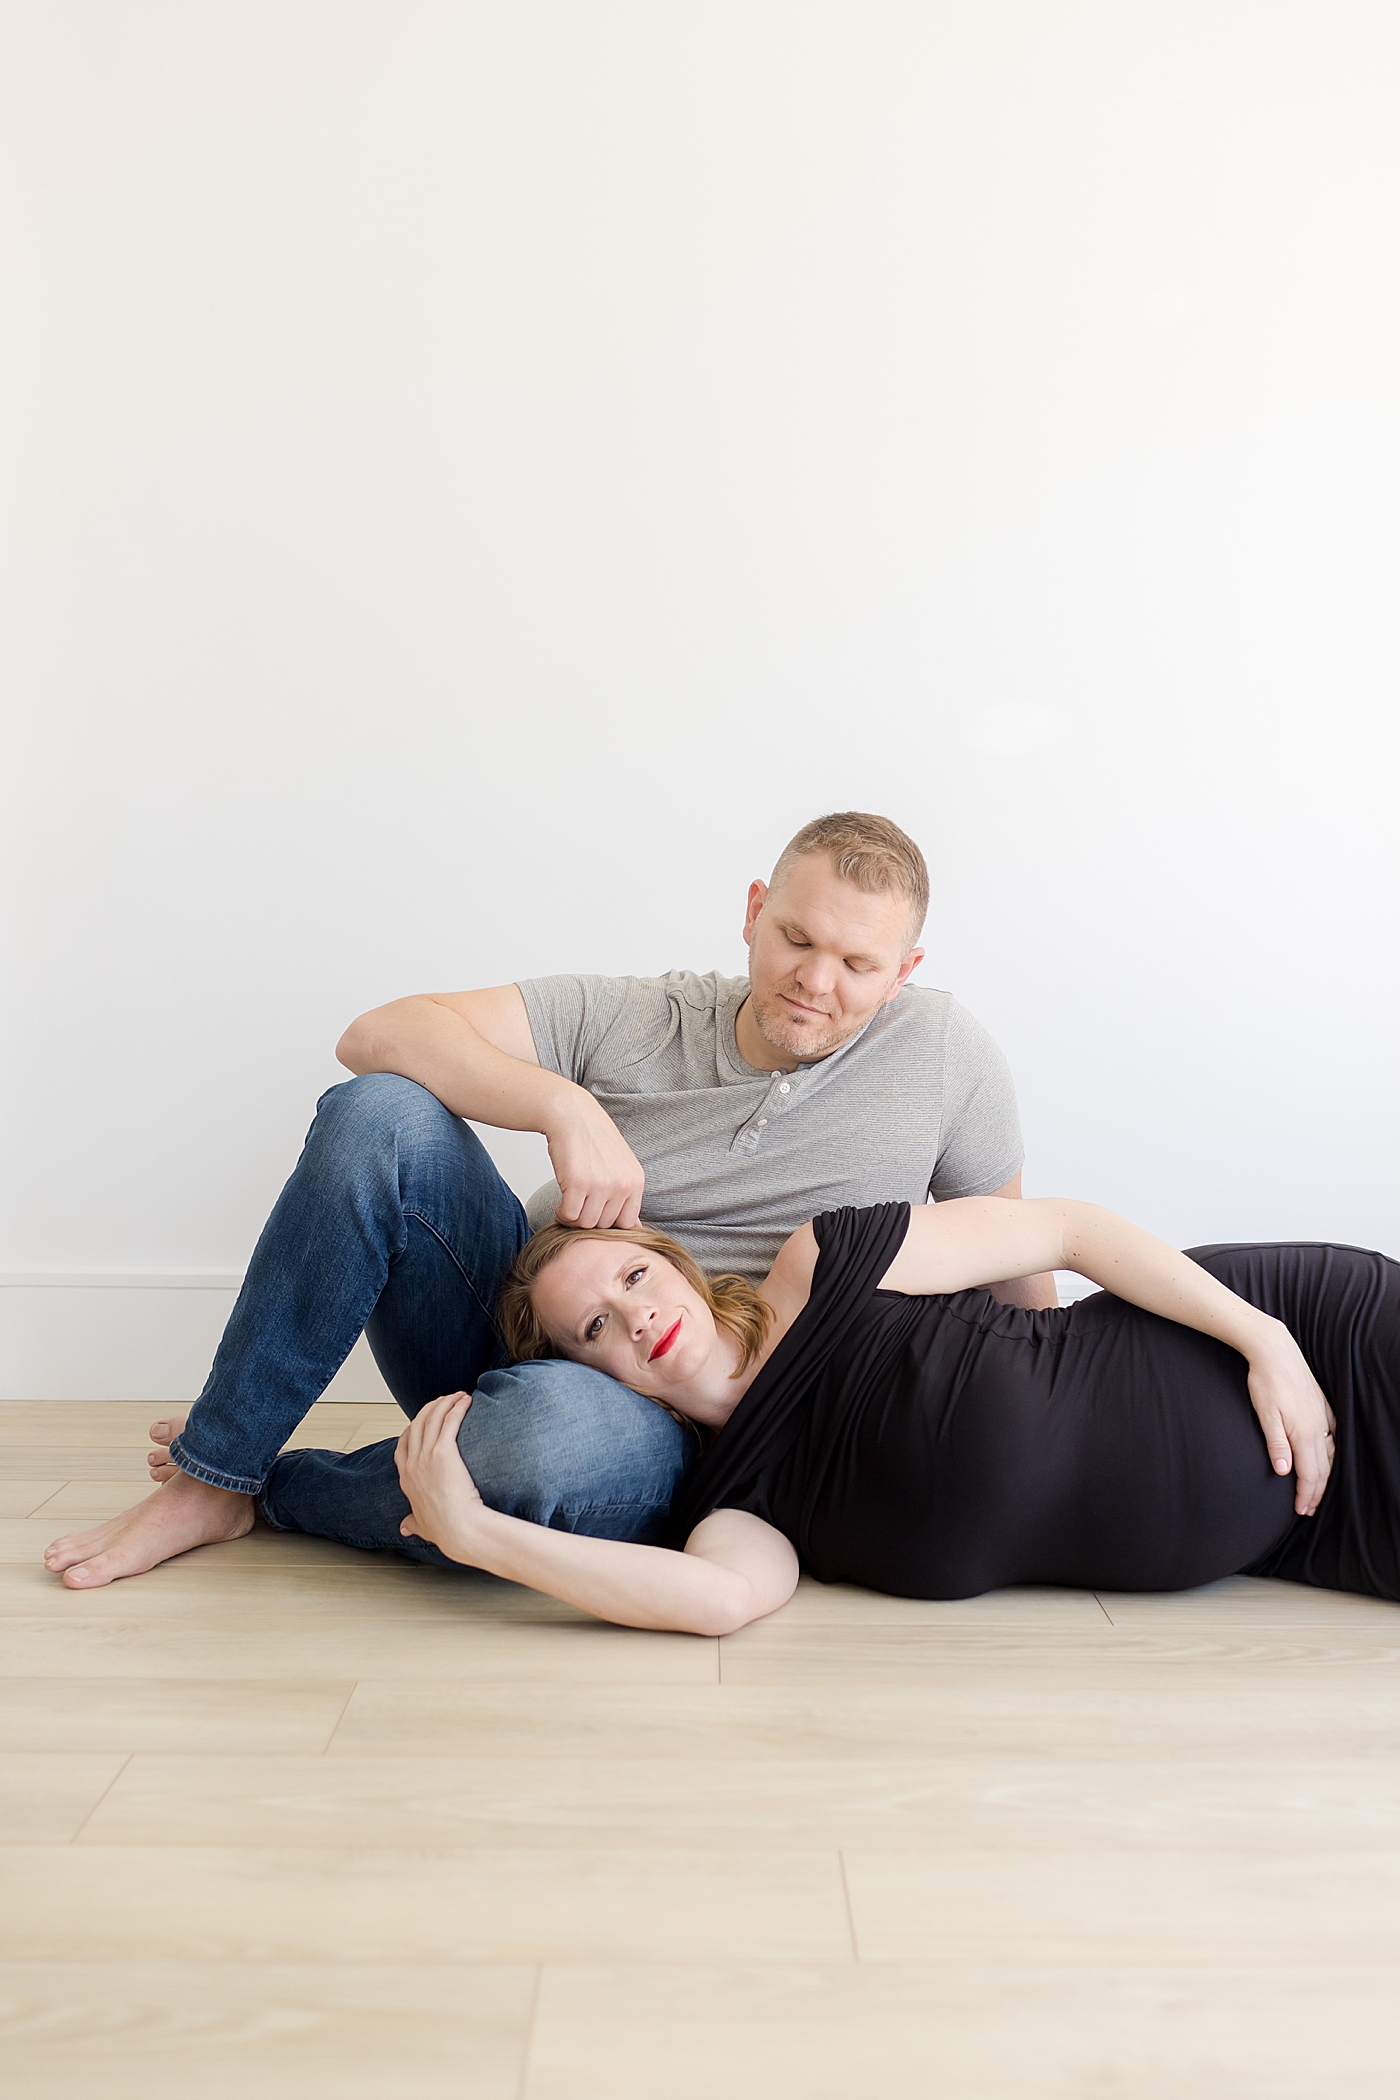 Mom and dad to be laying on the floor of the studio during maternity photos | Image by Emily Gerald Photography